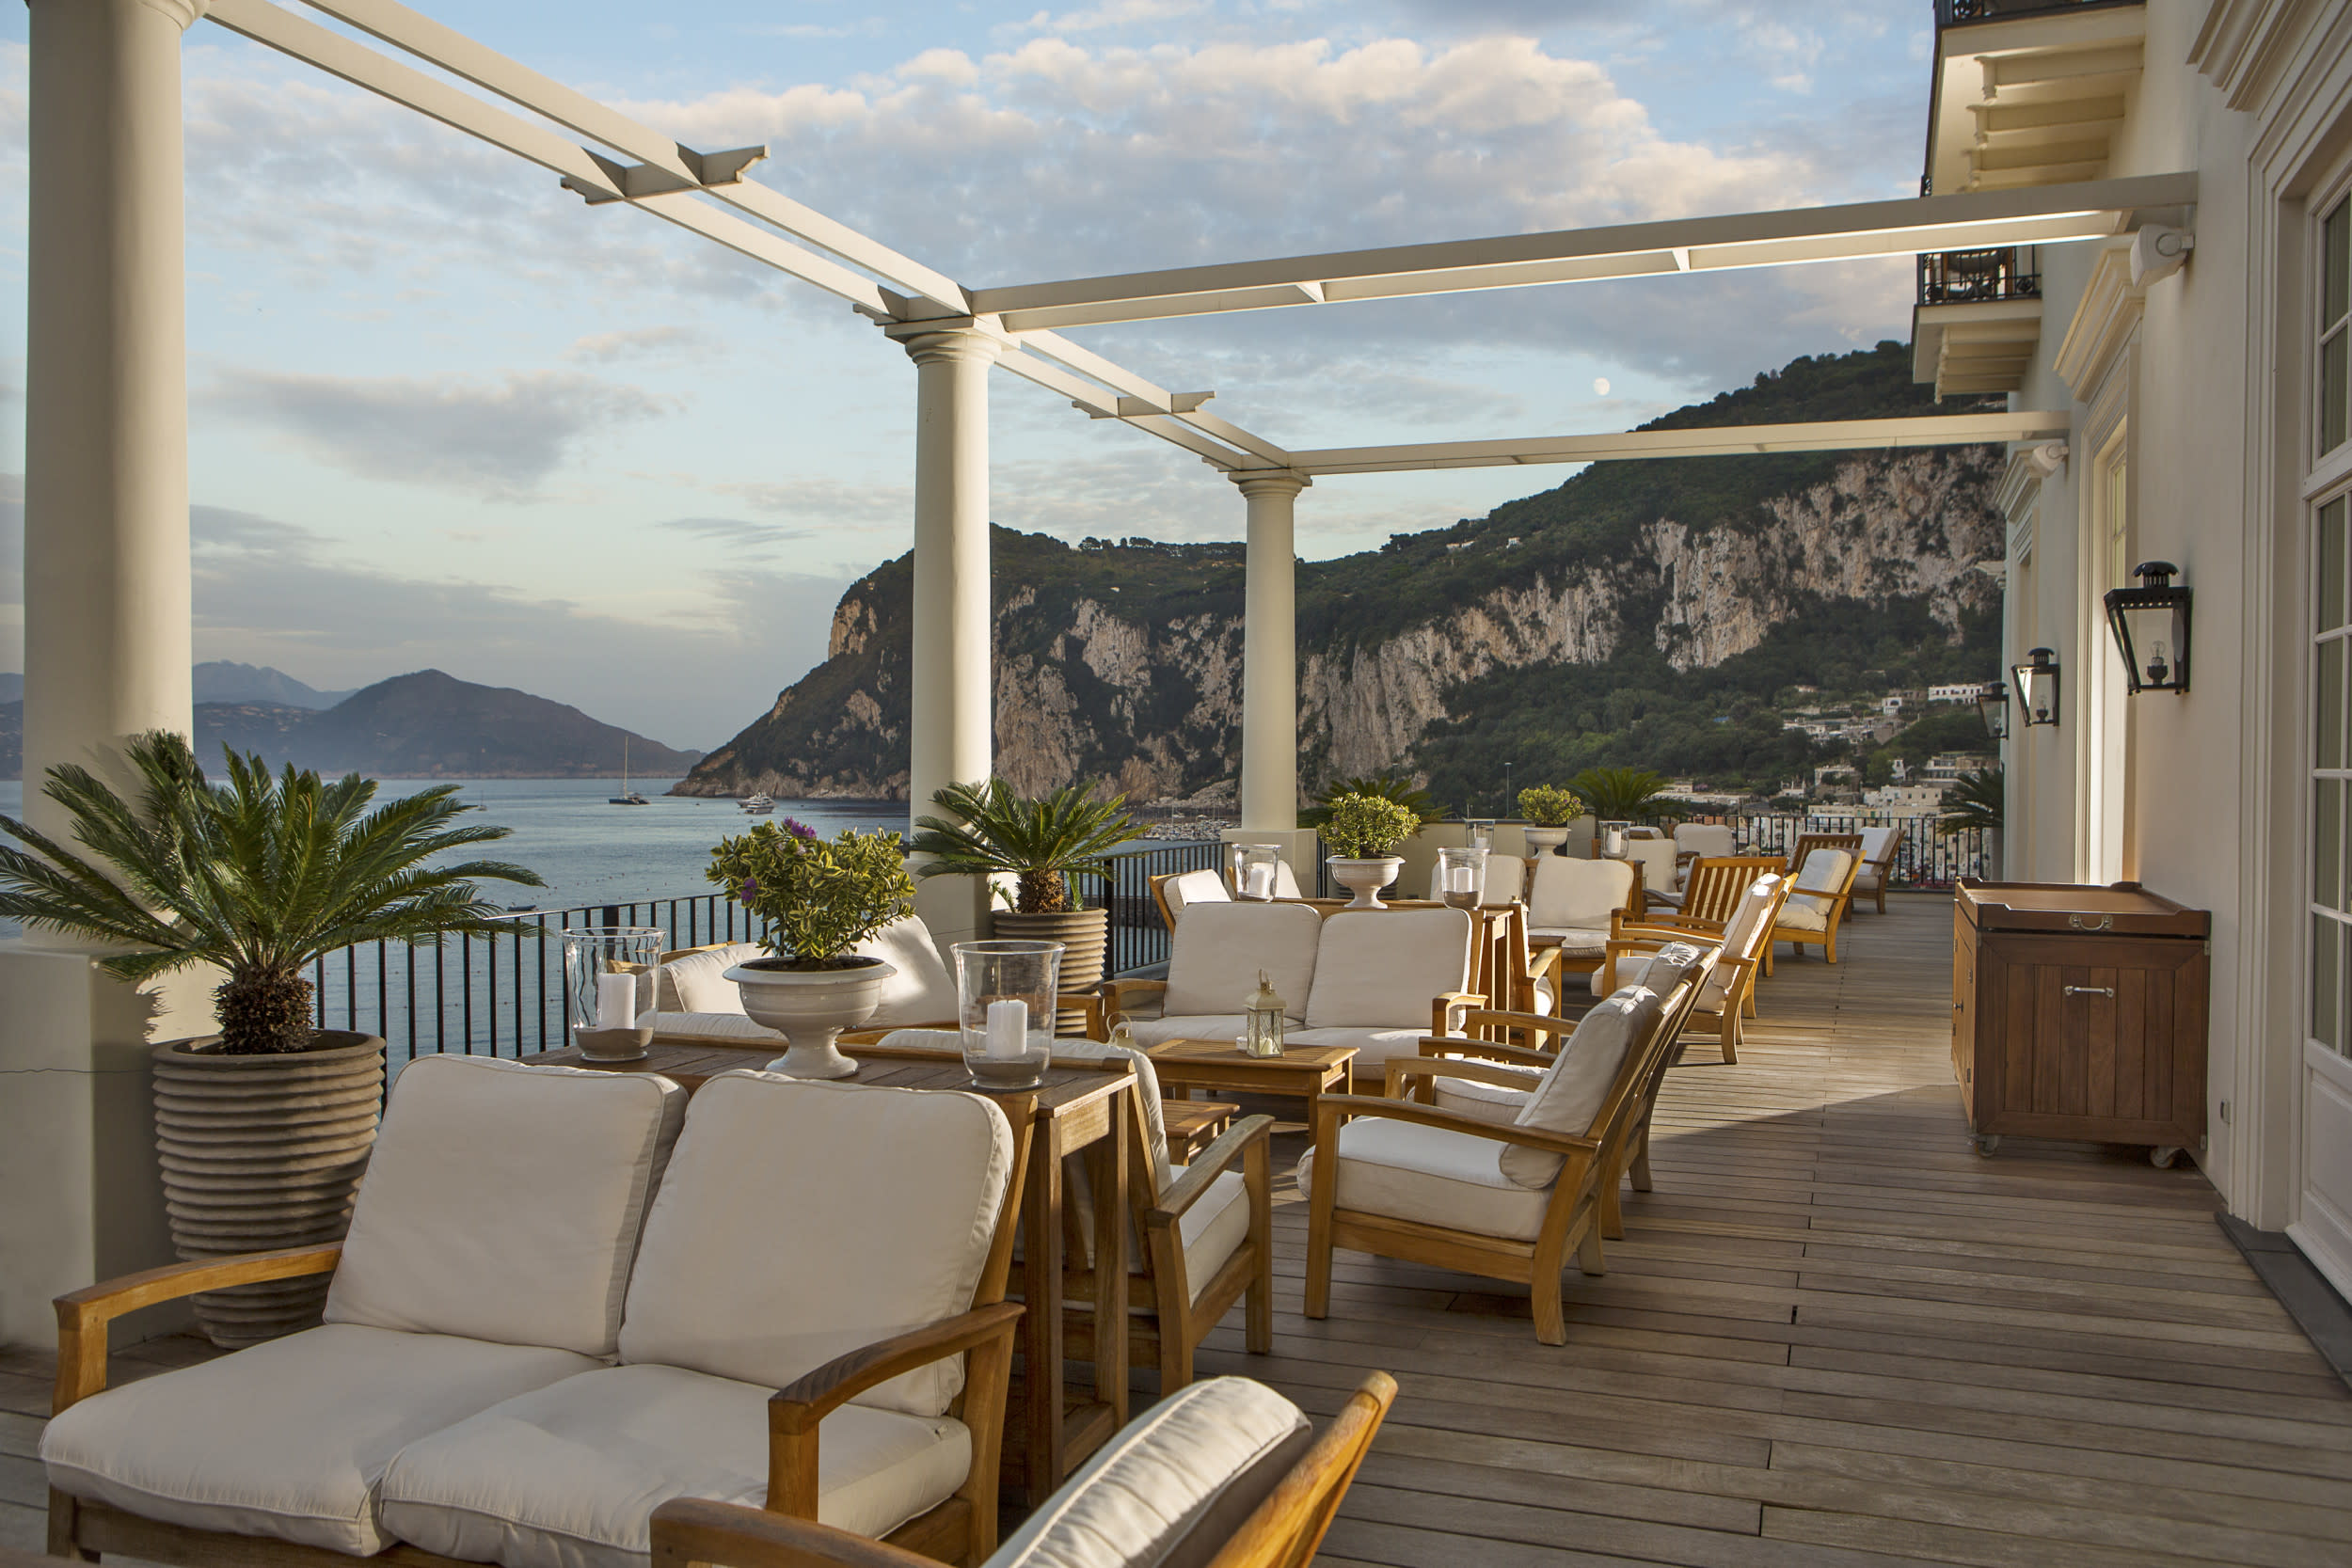 9 Best Hotels in Southern Italy - JK Place Capri